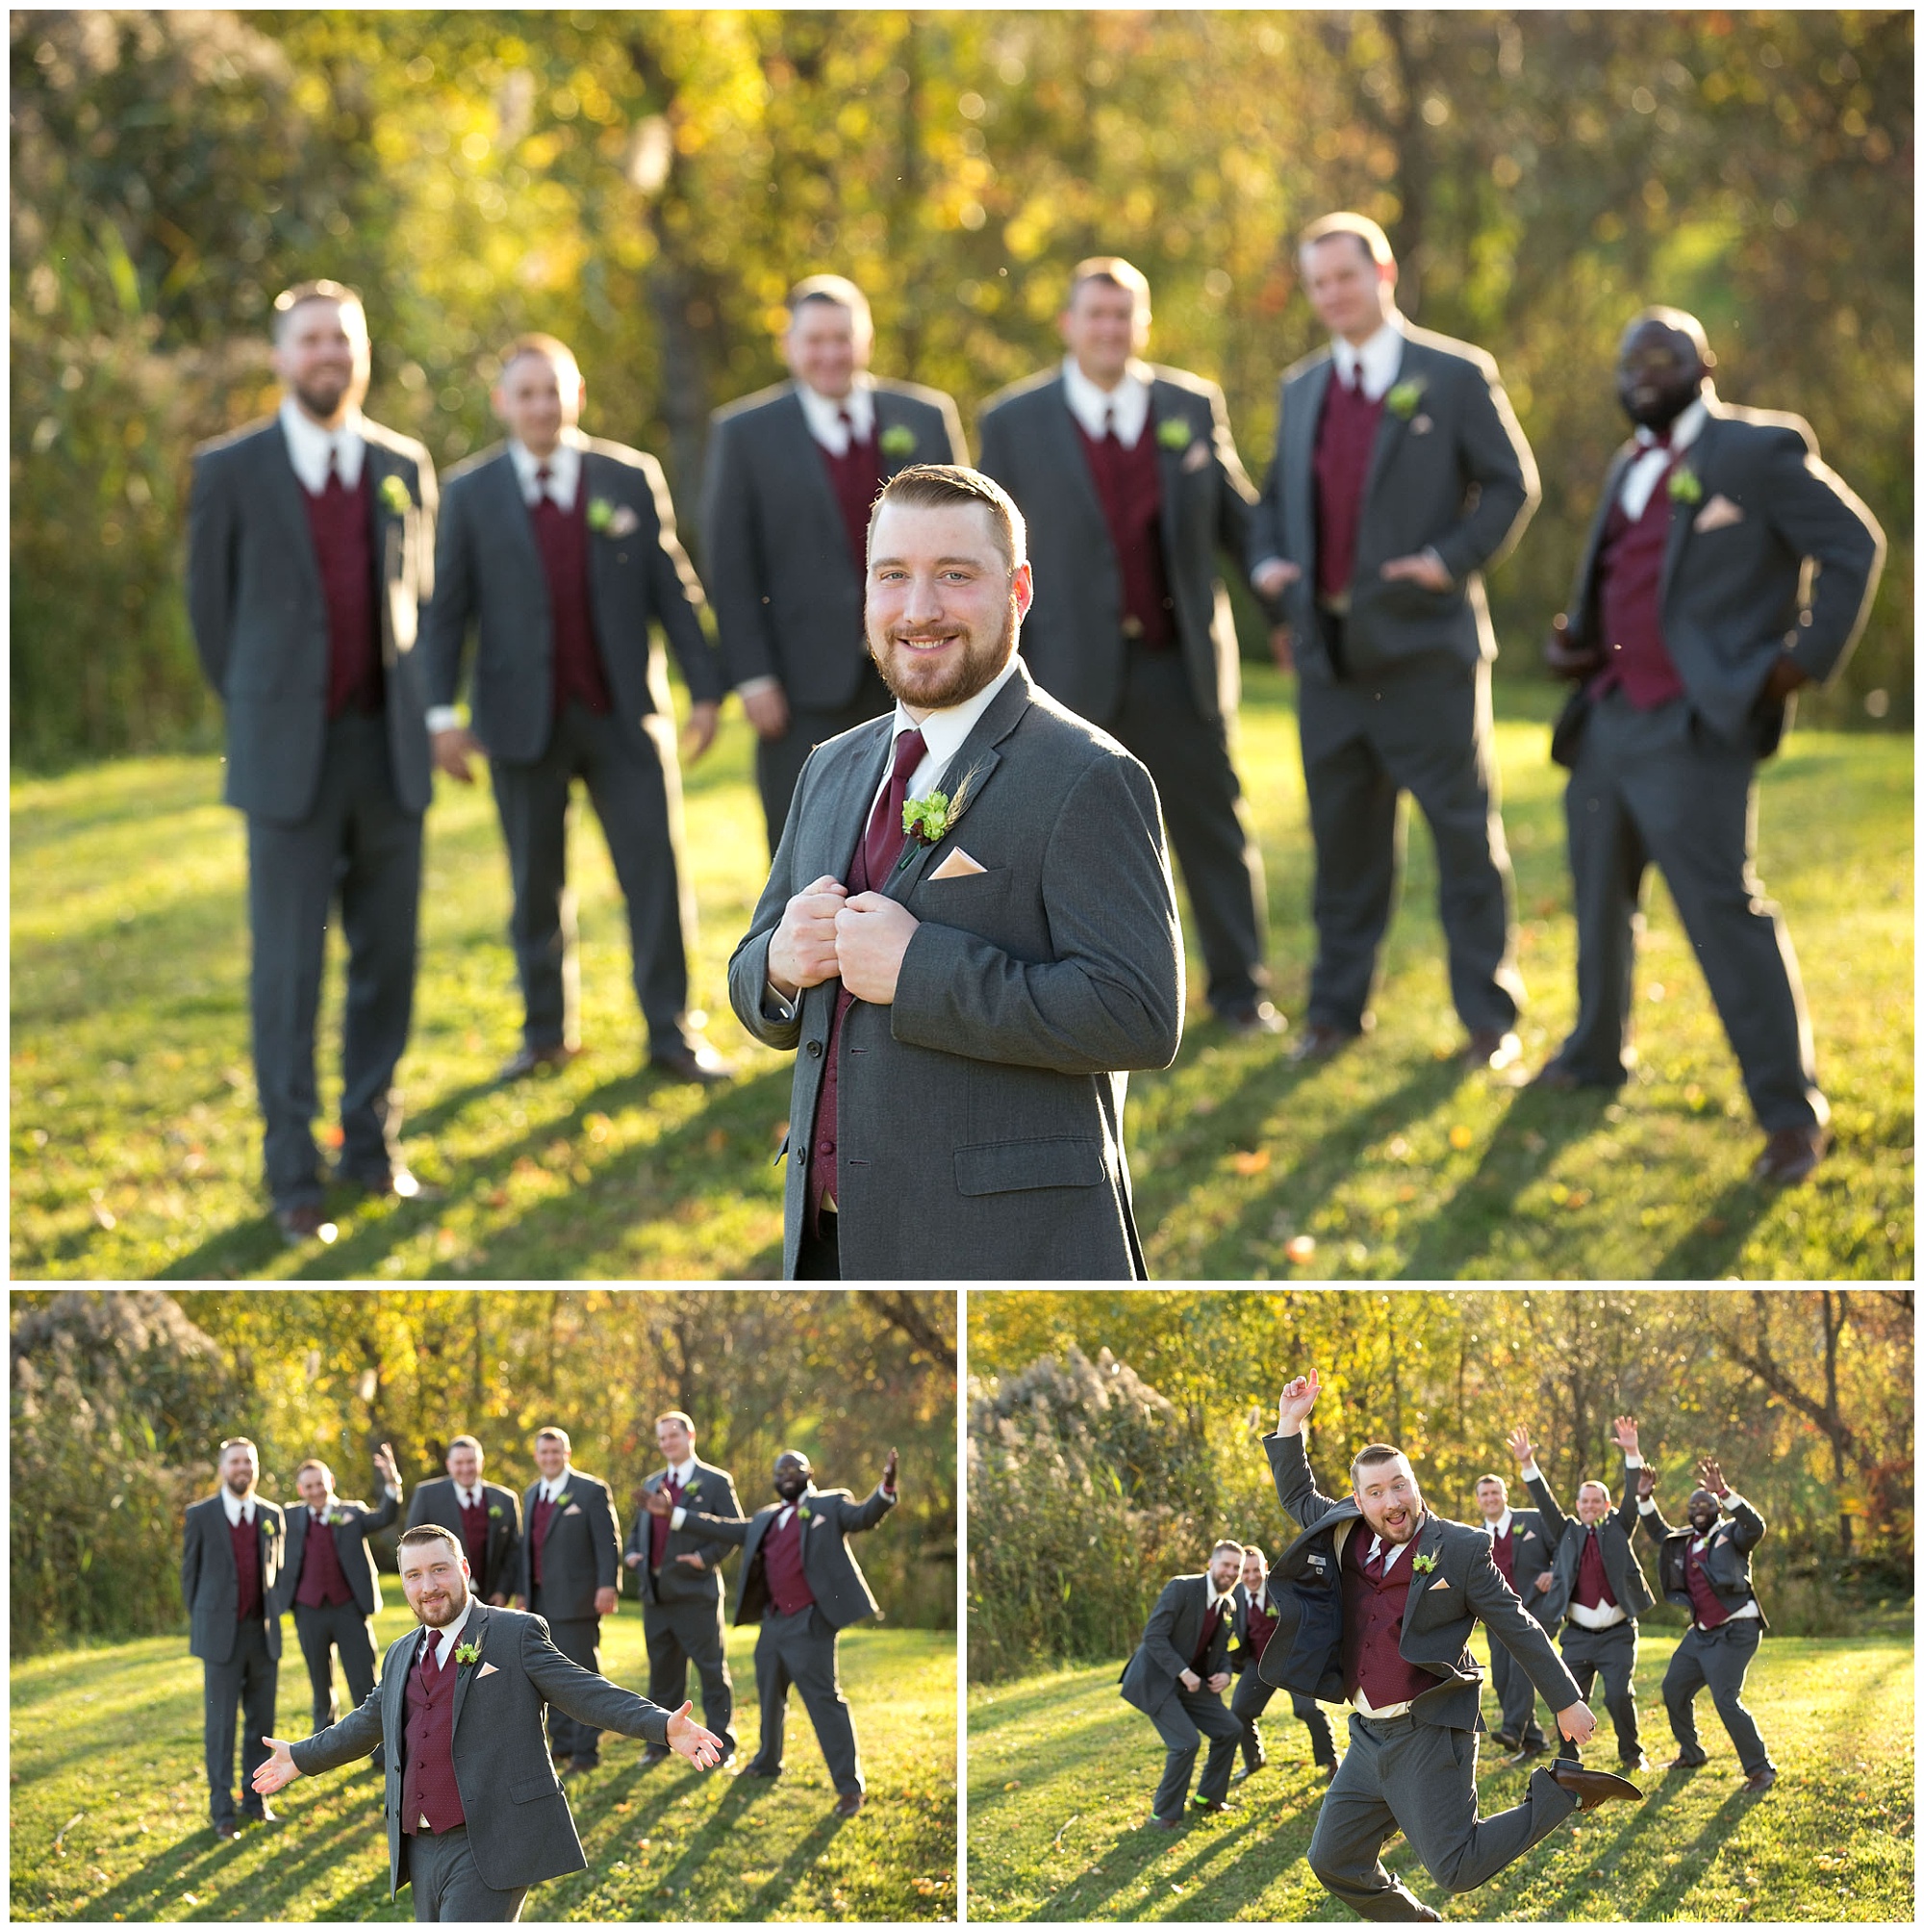 Three individual photos of a groom with his groomsmen.